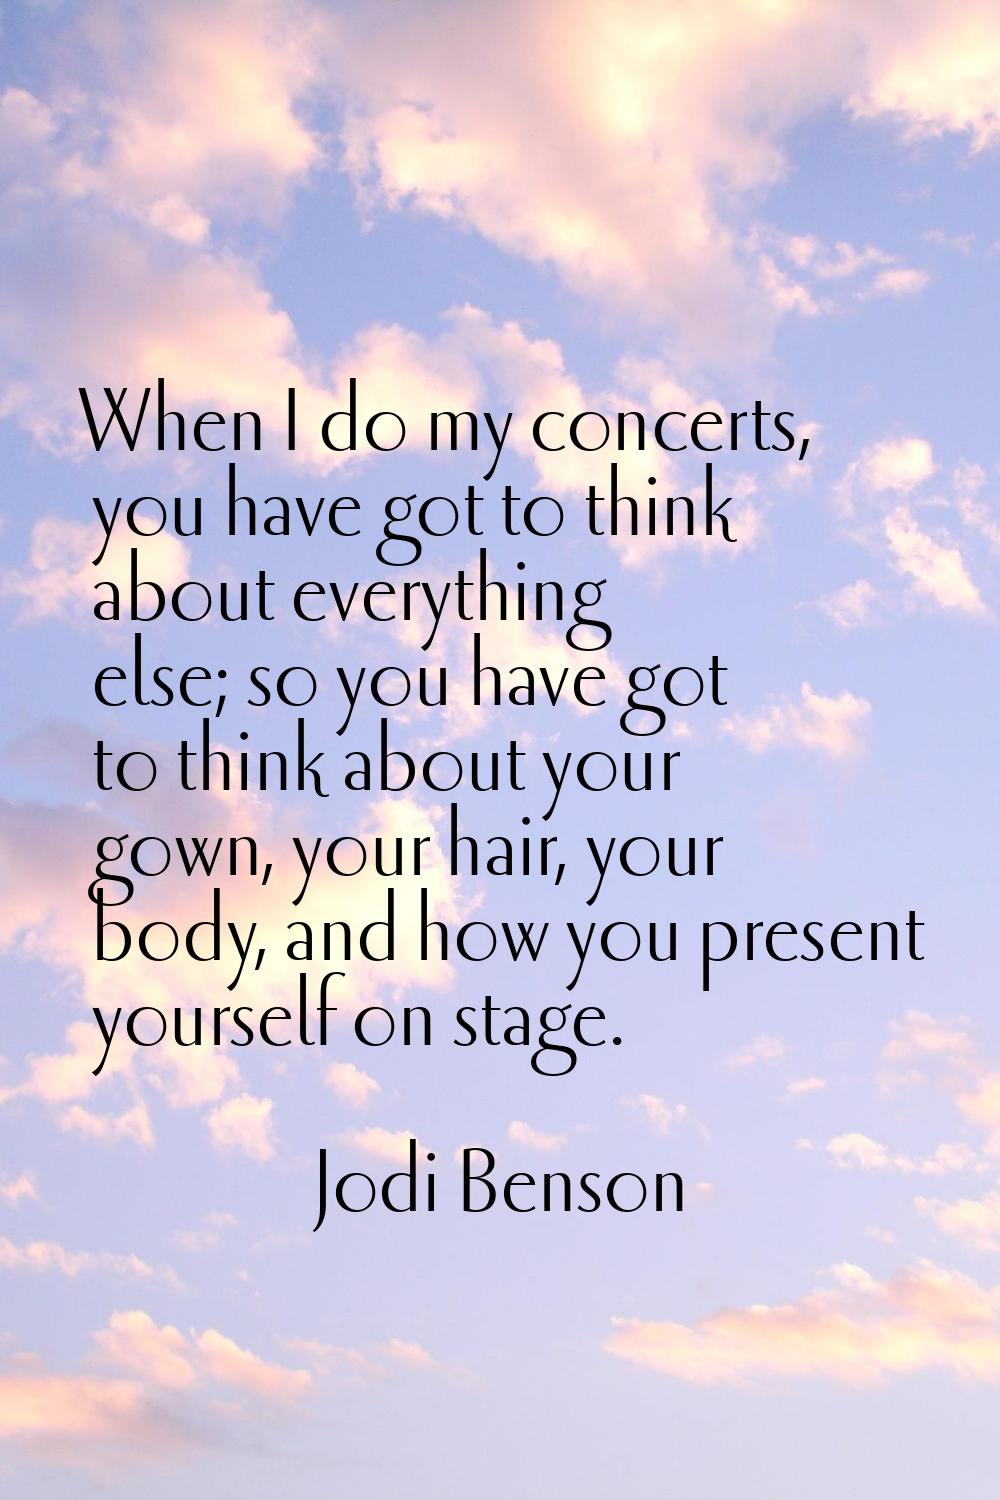 When I do my concerts, you have got to think about everything else; so you have got to think about 